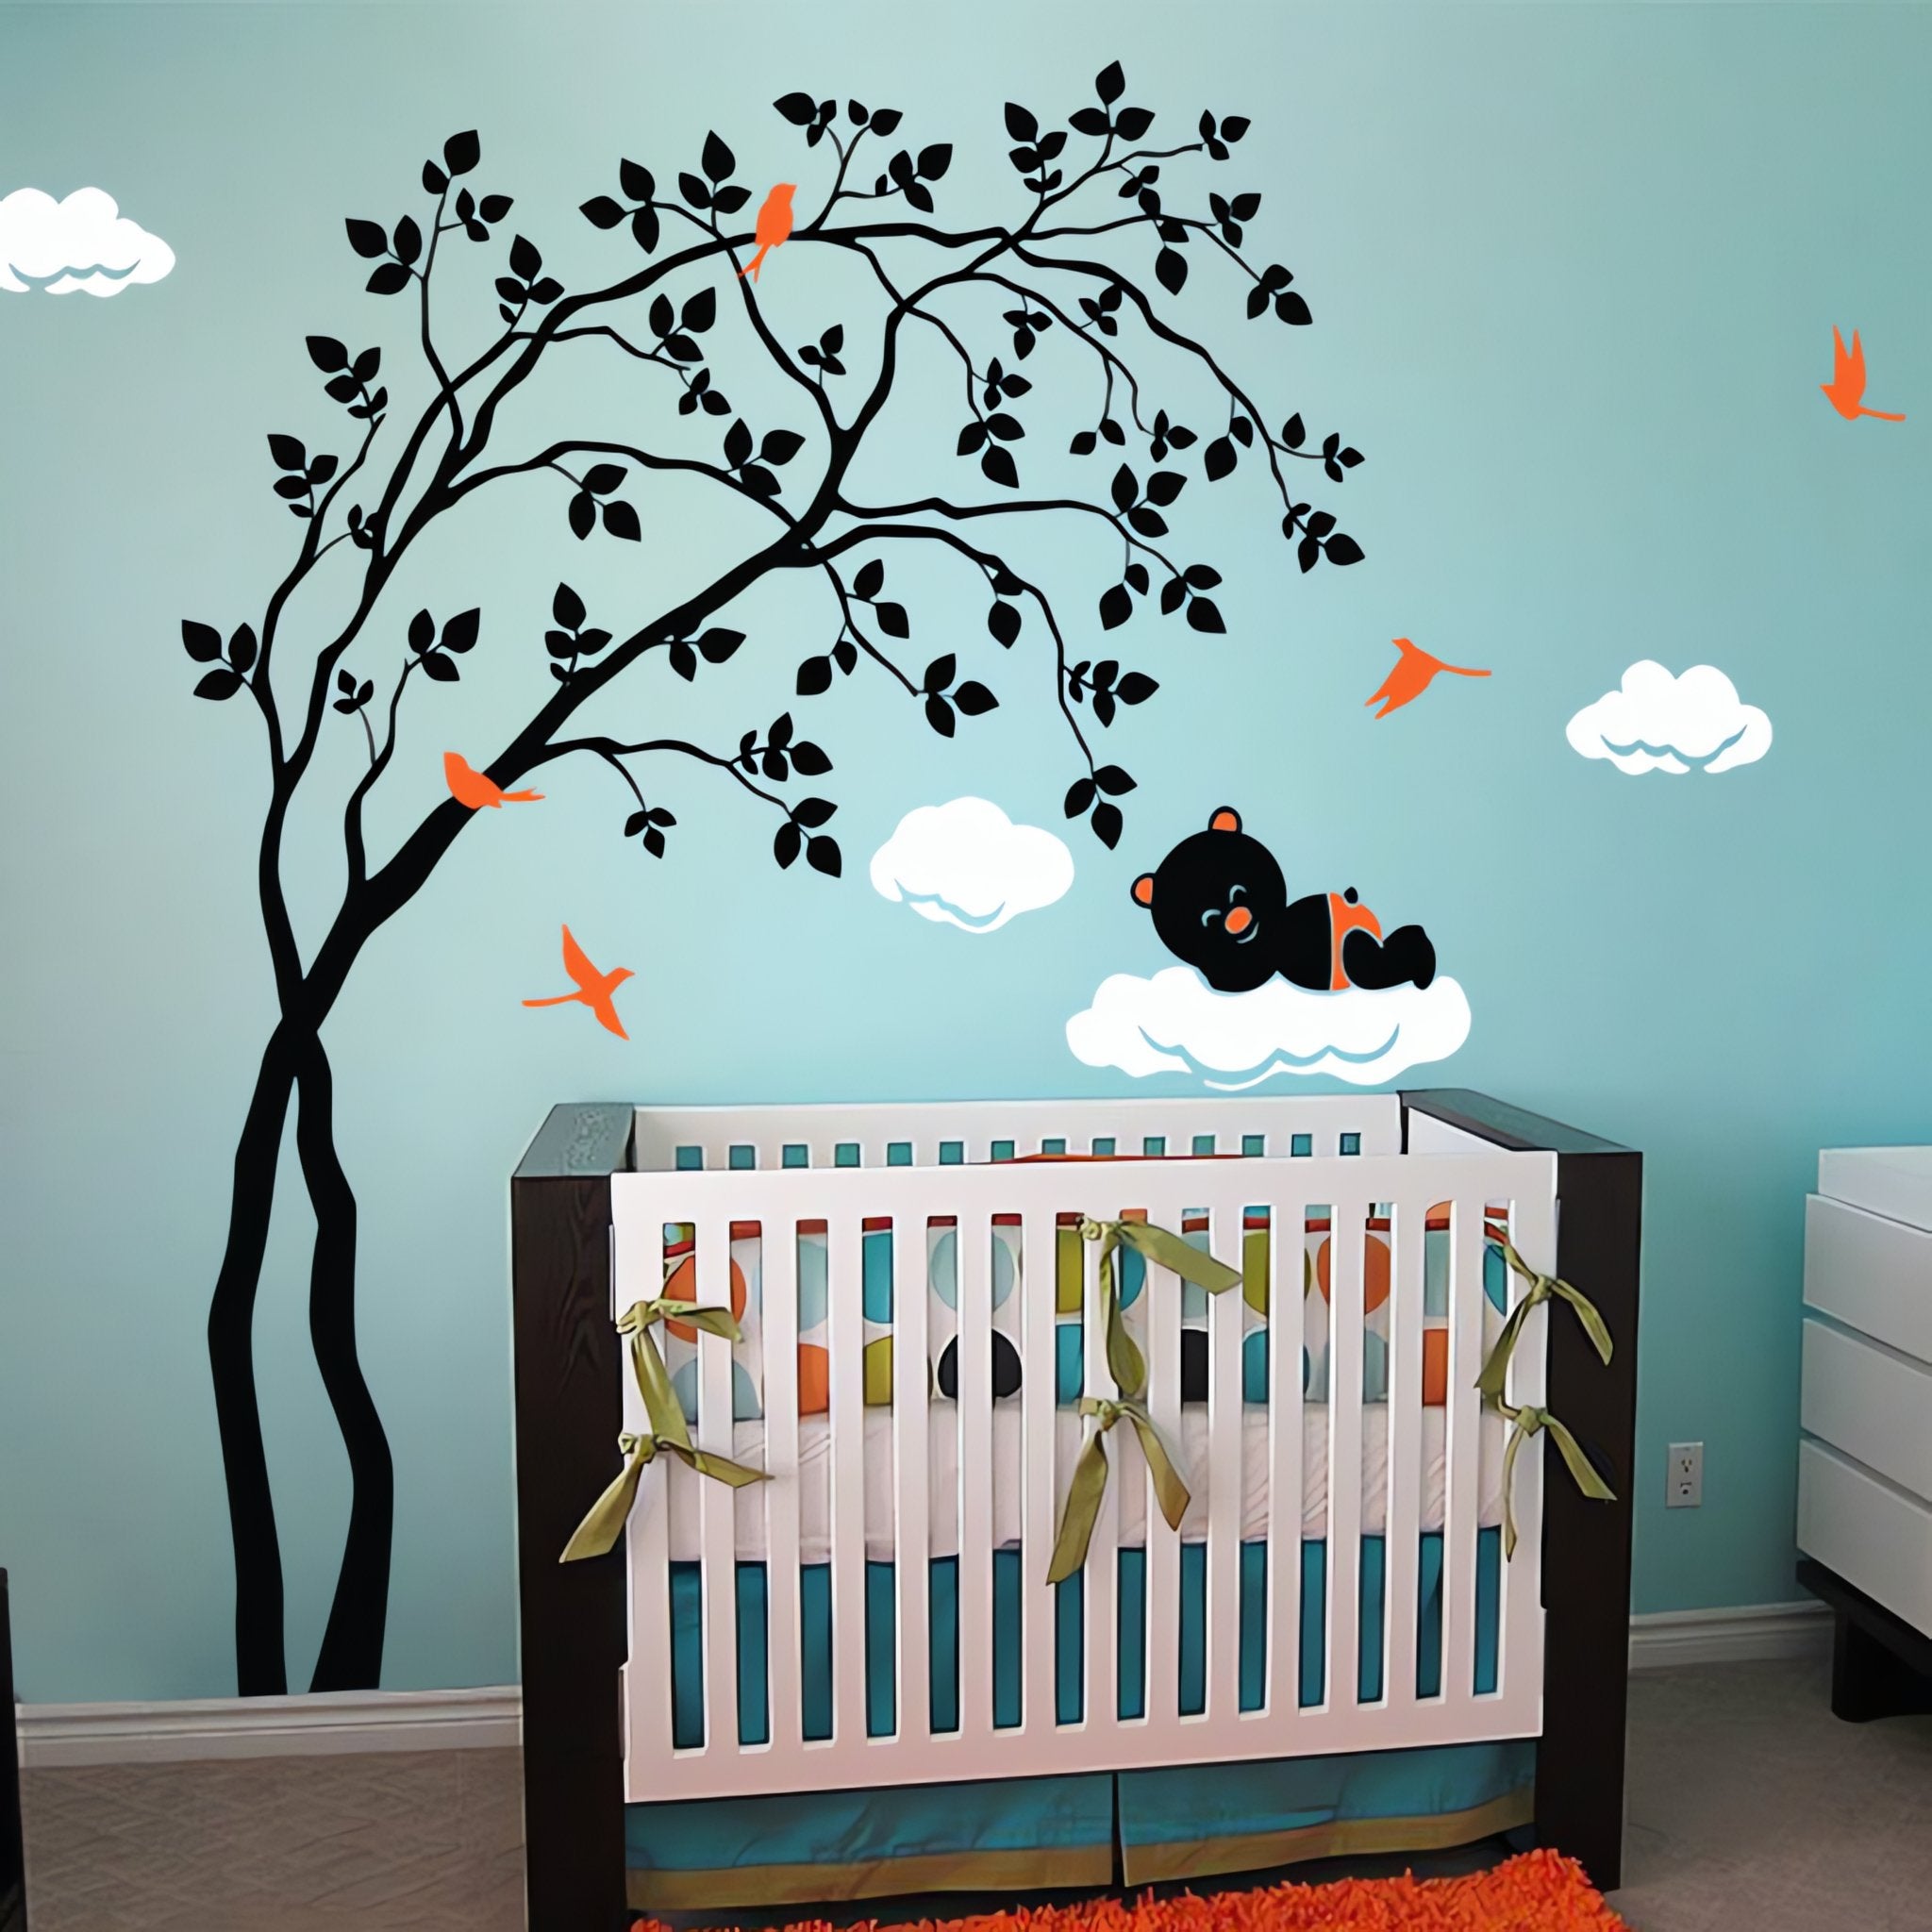 Tree wall sticker with a leaning tree, bears resting on clouds and birds in a nursery with a crib.